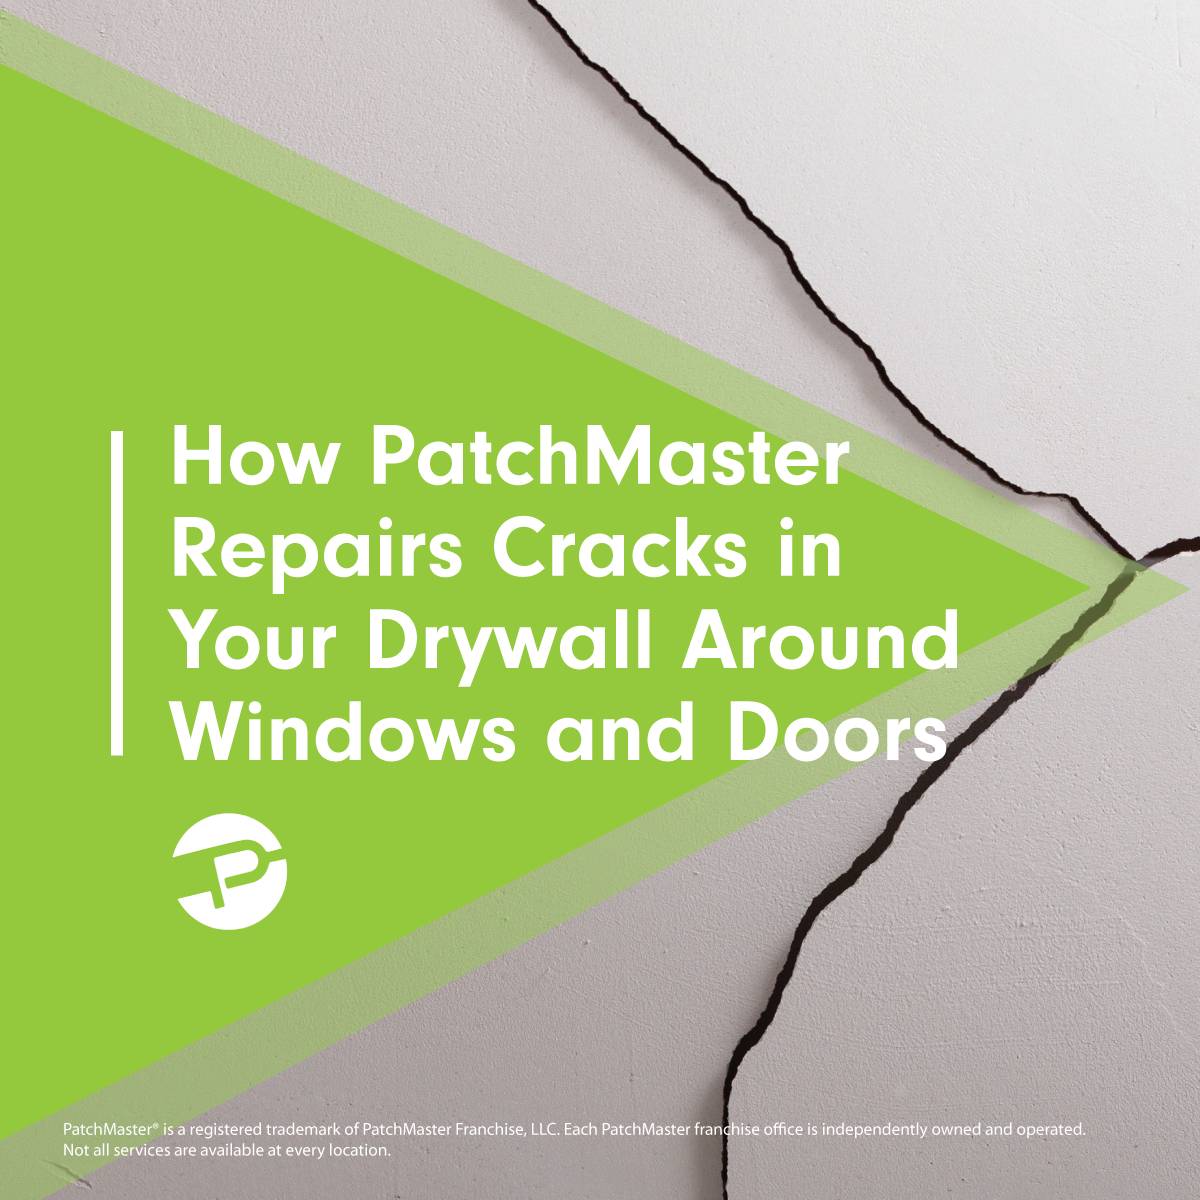 How PatchMaster Repairs Cracks in Your Drywall Around Windows and Doors